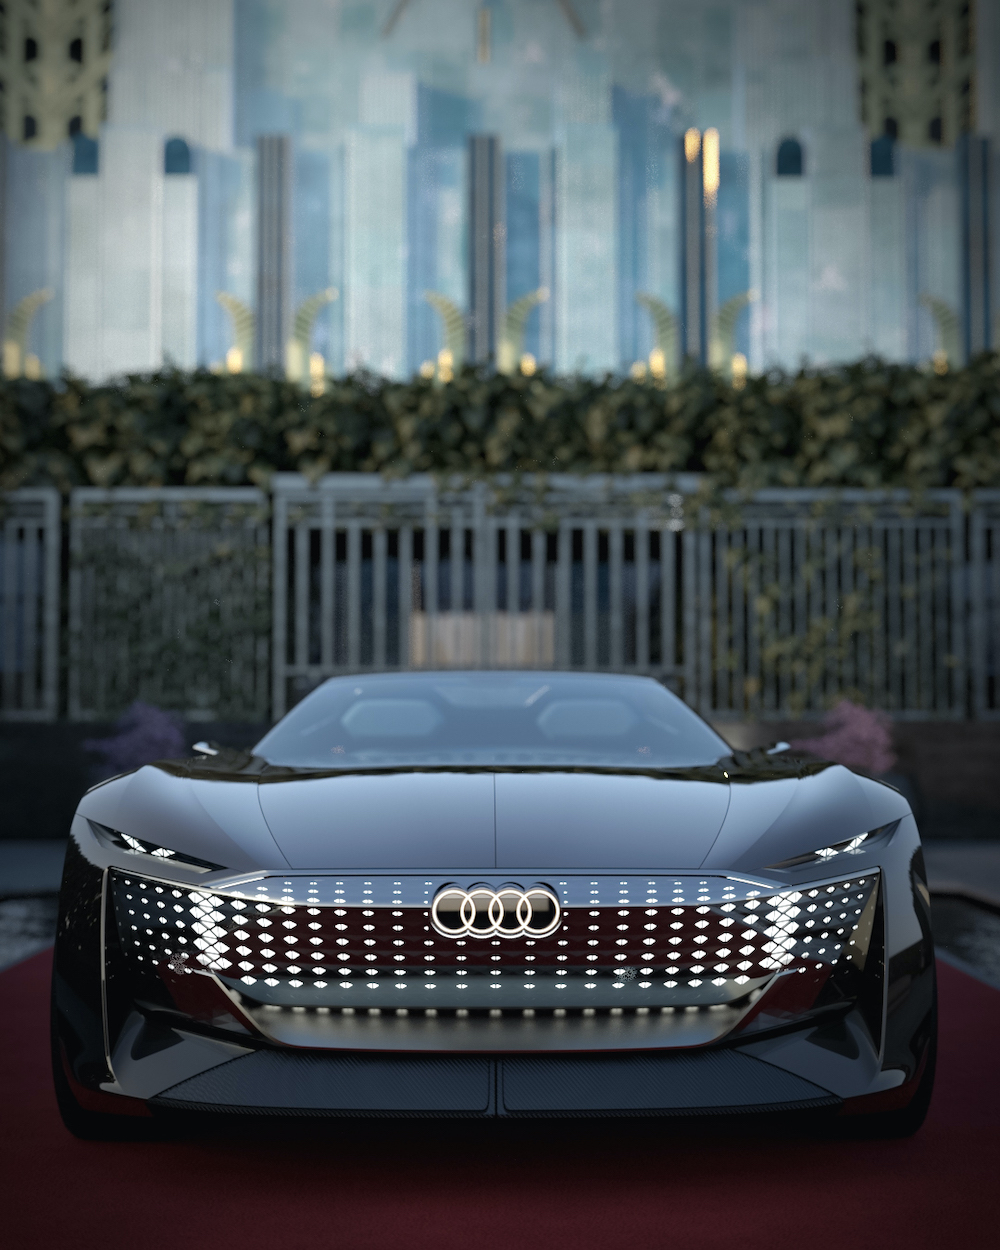 Audi Skysphere Concept Revealed -- Perfect Vehicle for 'Knight Rider' Reboot?